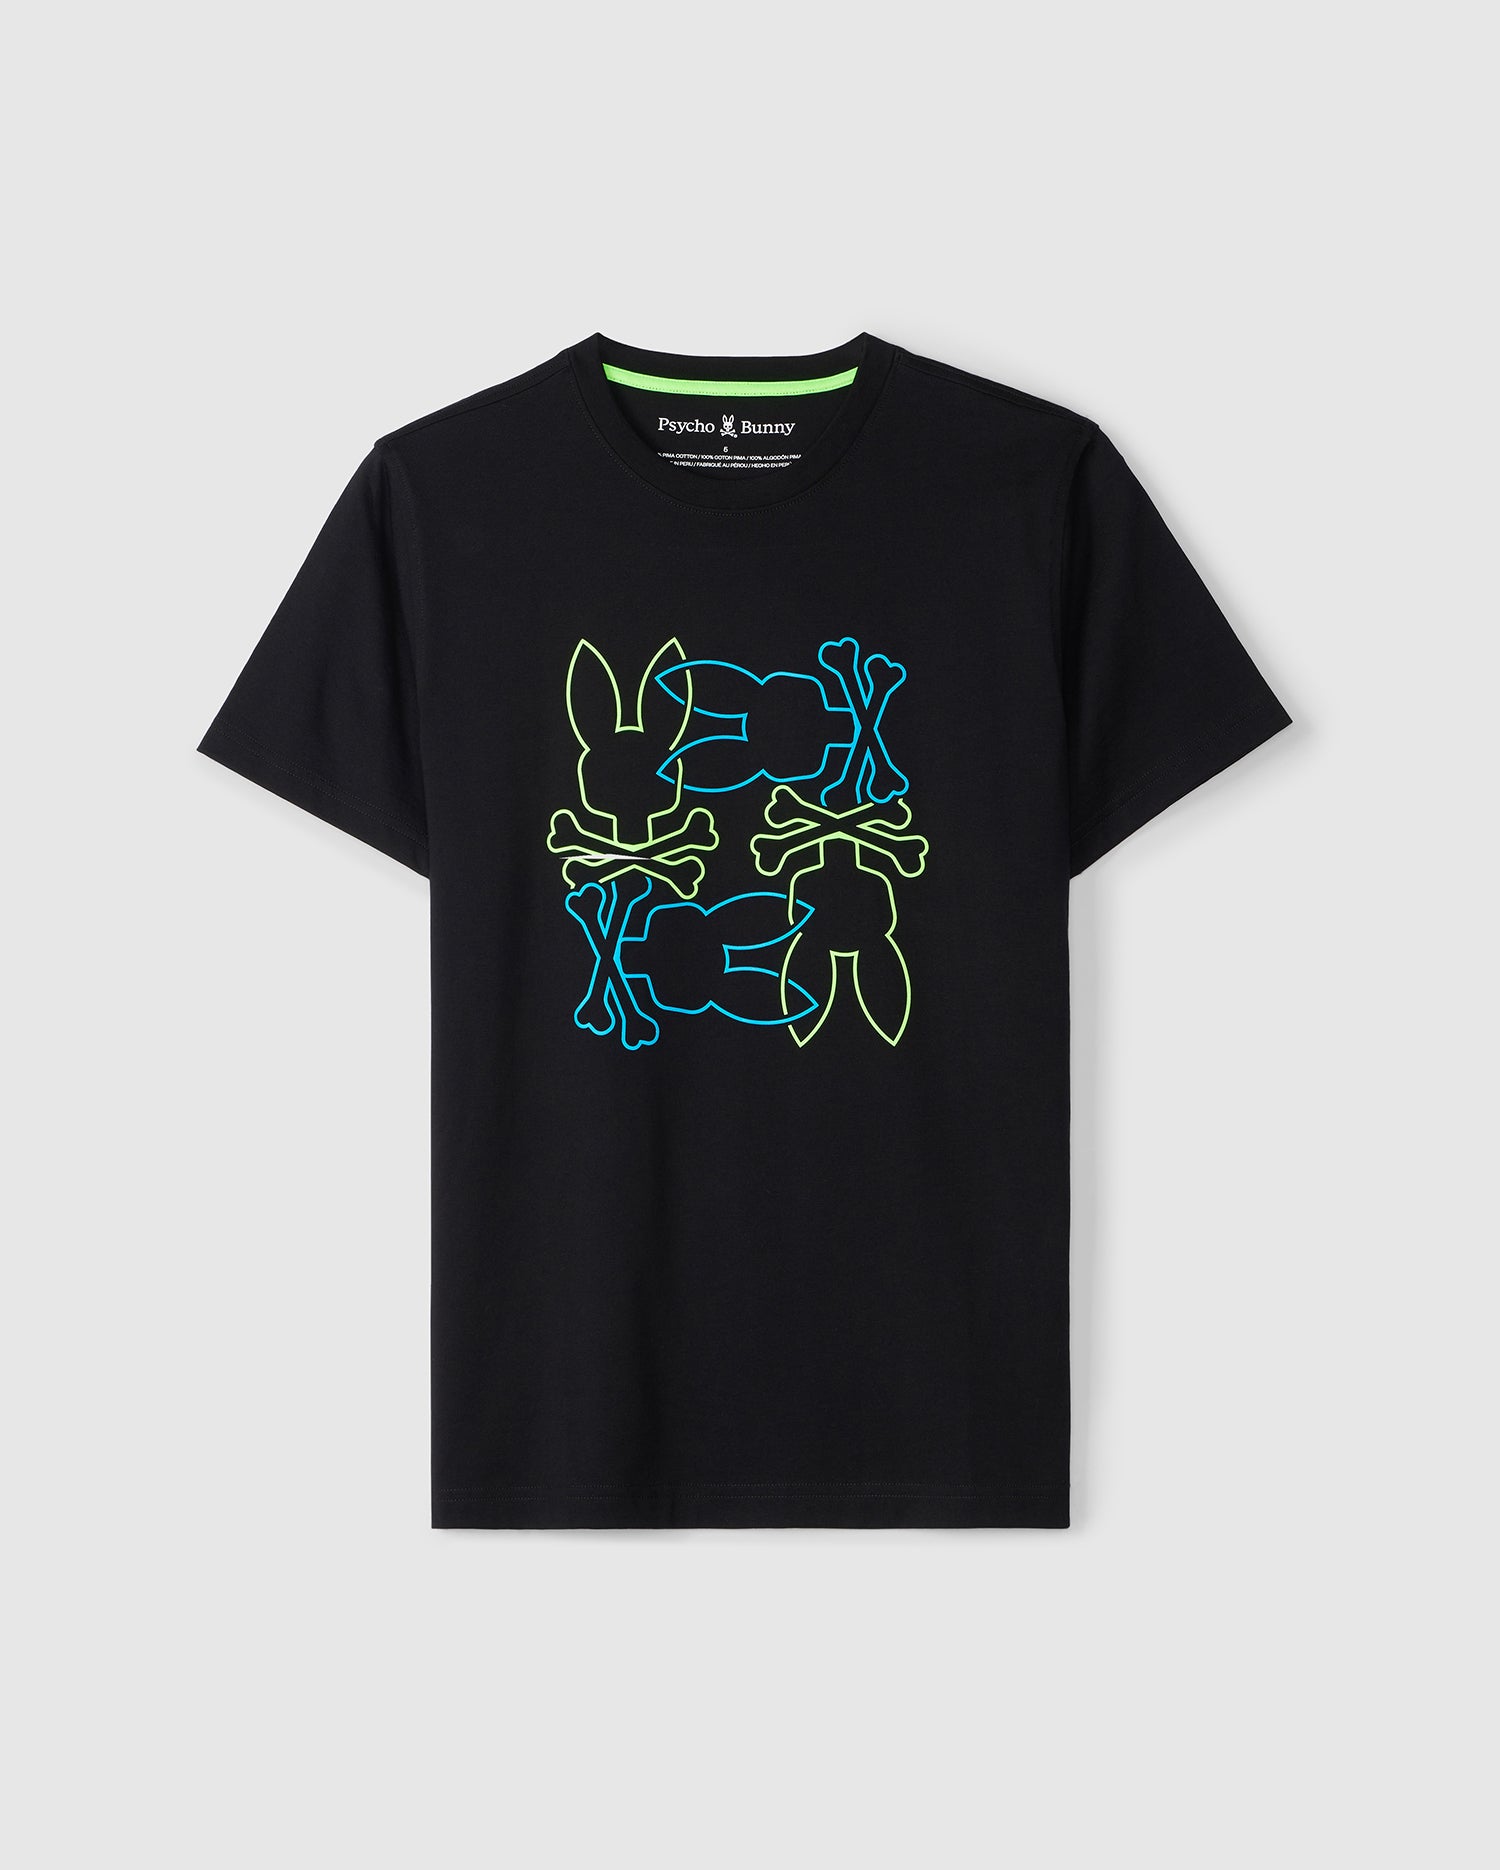 Black MENS RODMAN GRAPHIC TEE featuring an HD-printed interlocking Bunny design in neon blue and green, displayed on a plain background by Psycho Bunny.